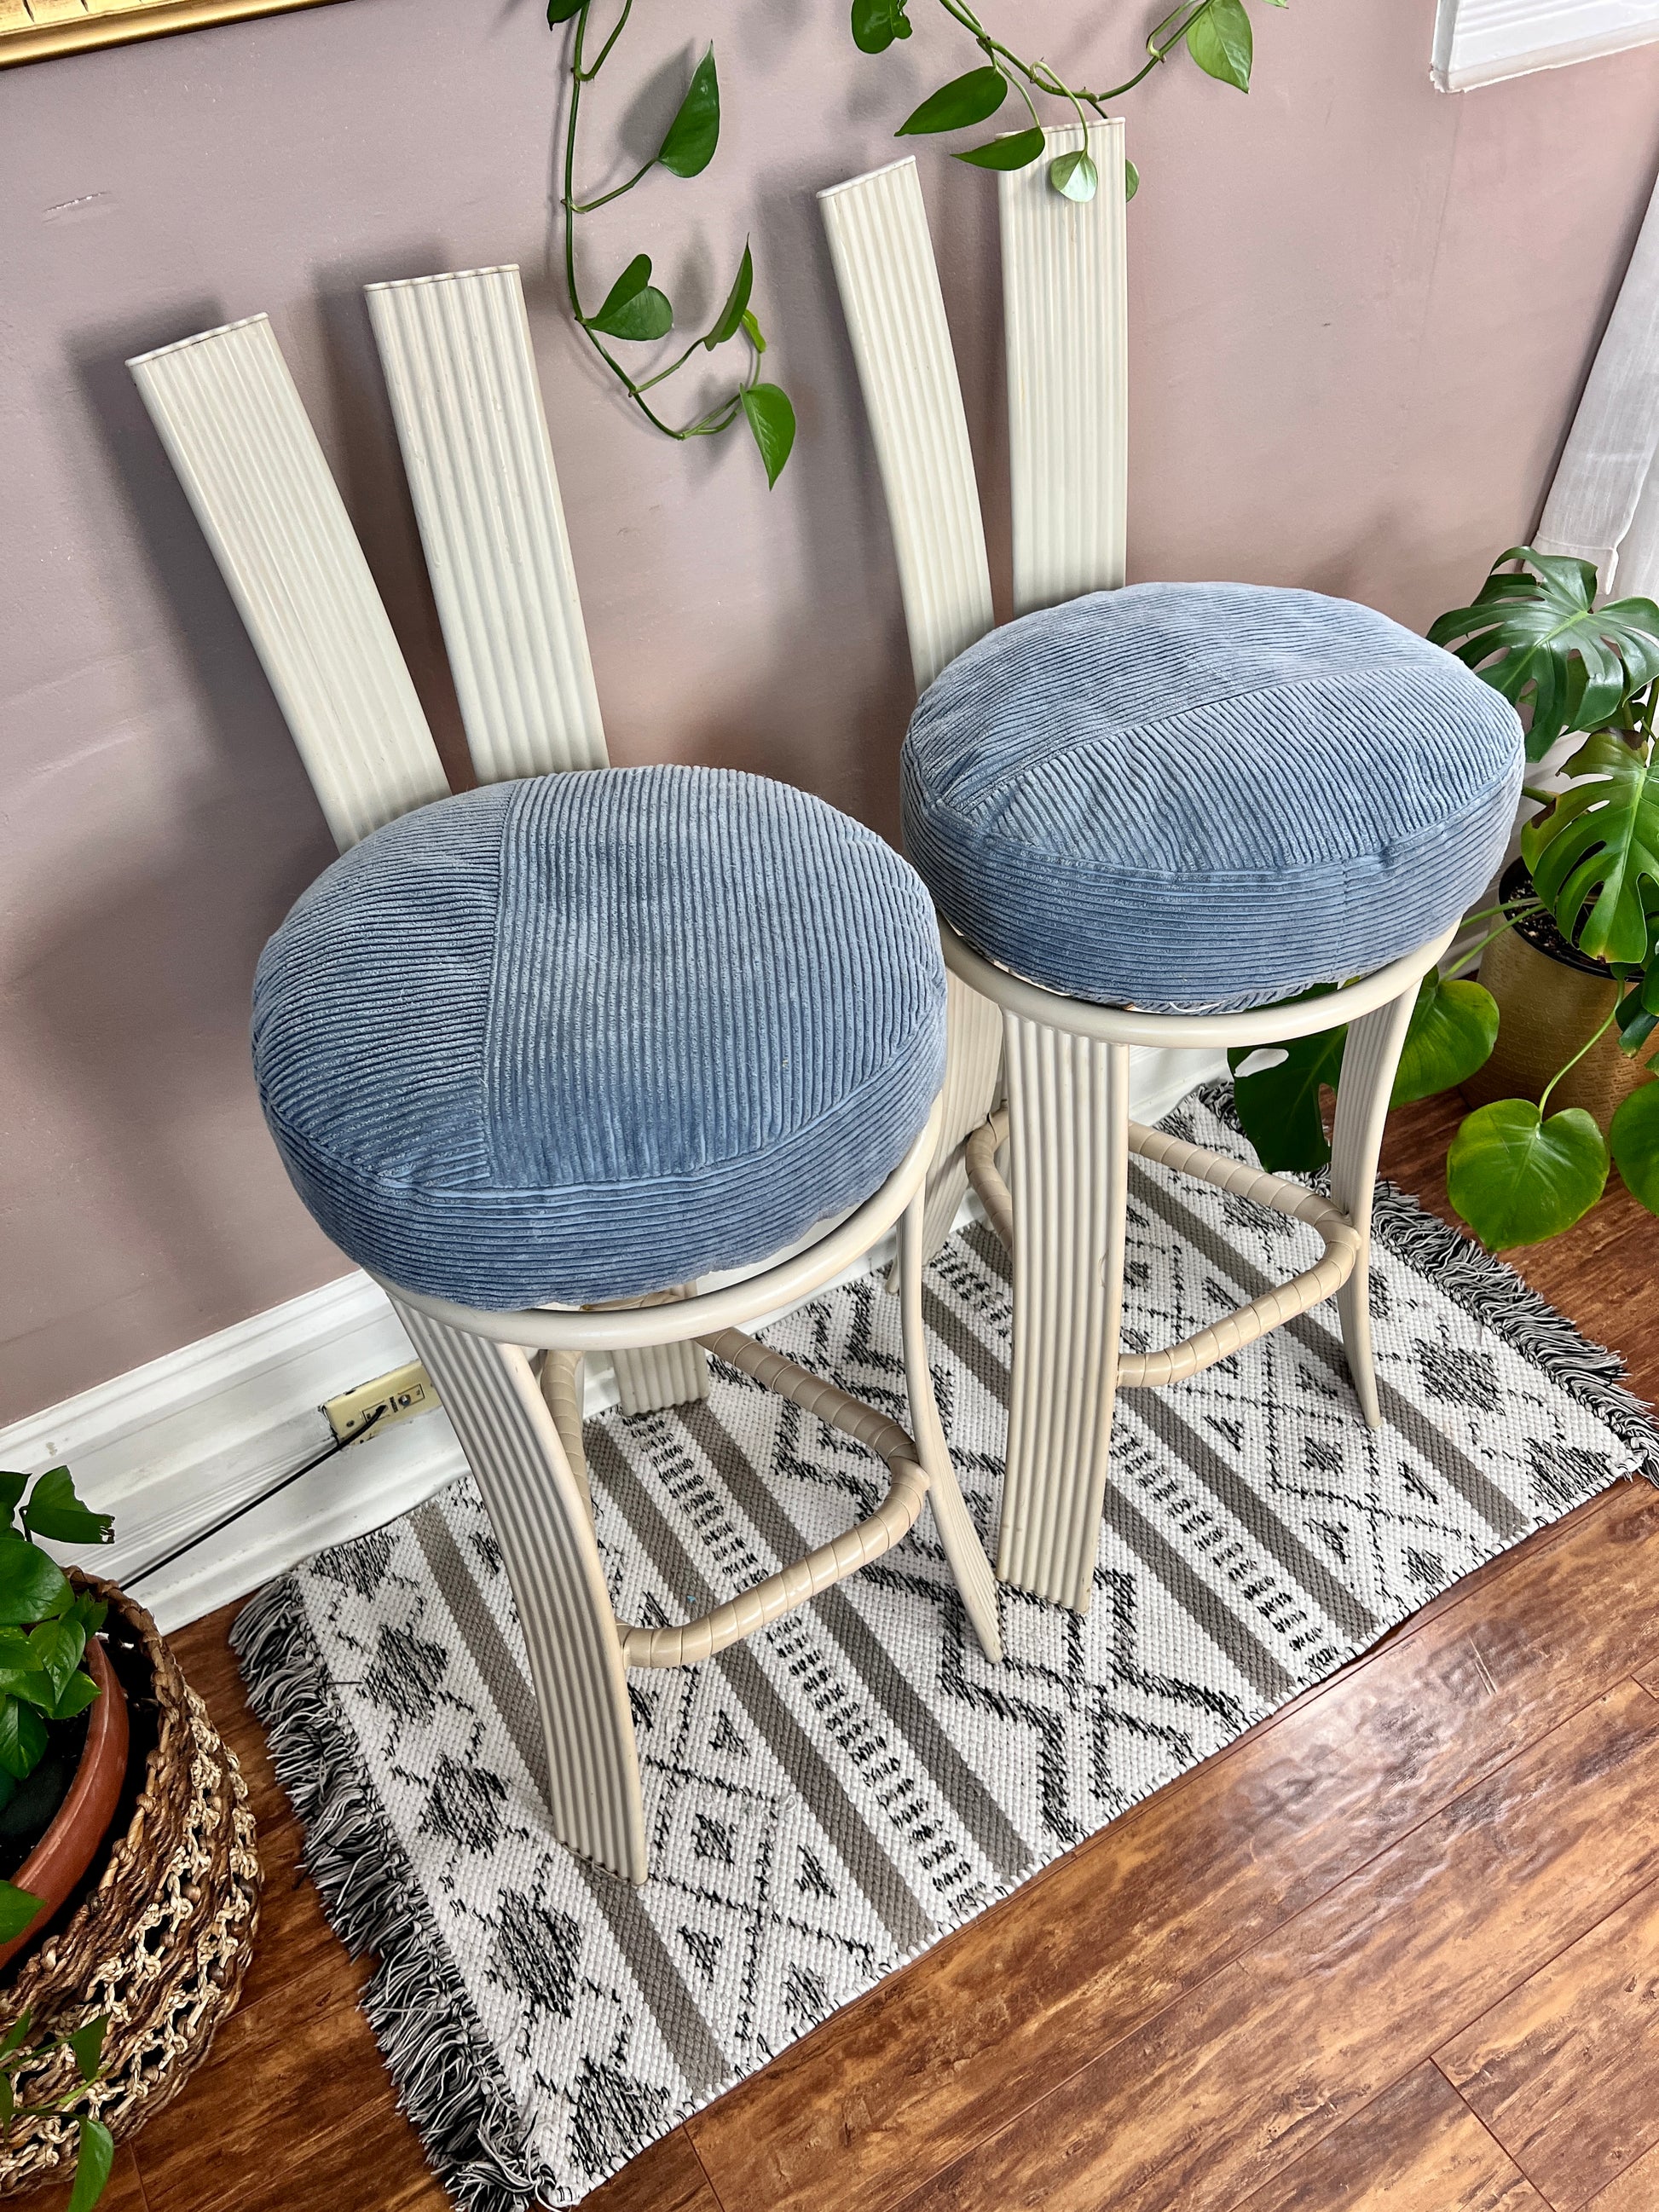 These are 1980s White Metal Tropitone Bar Stools with round baby blue corduroy seat pillows